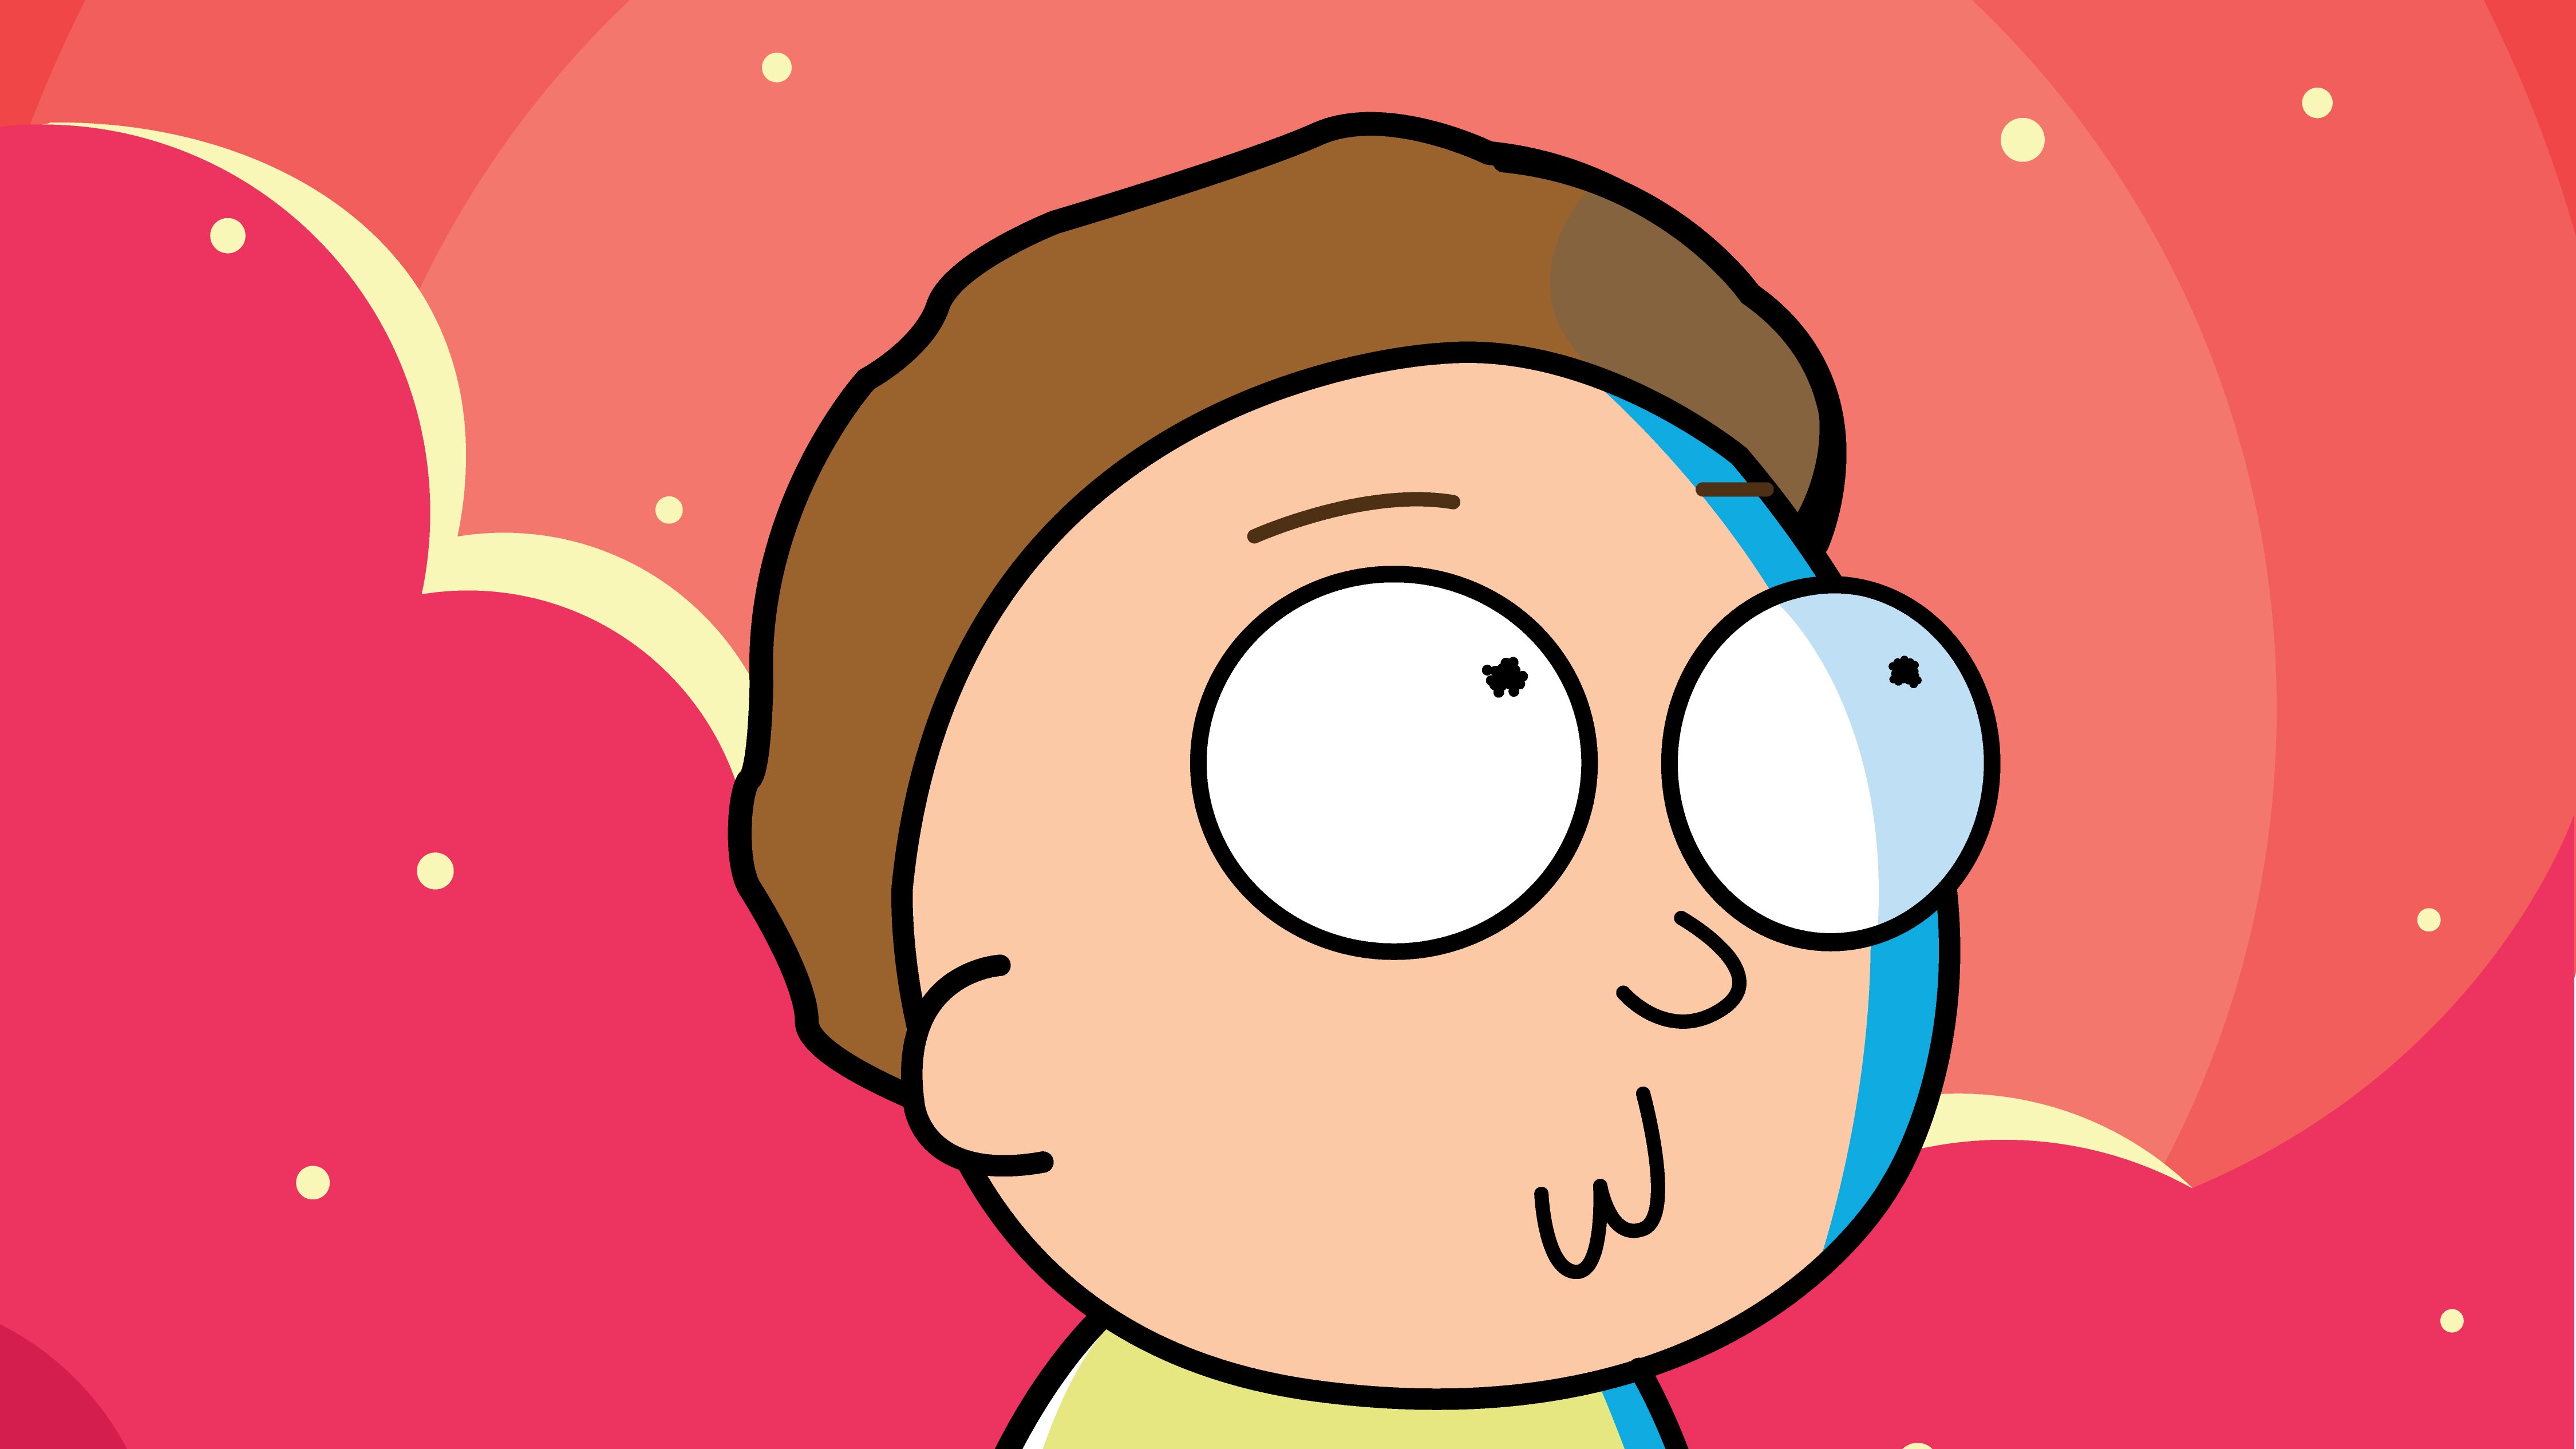 Wallpaper Morty from Rick and Morty